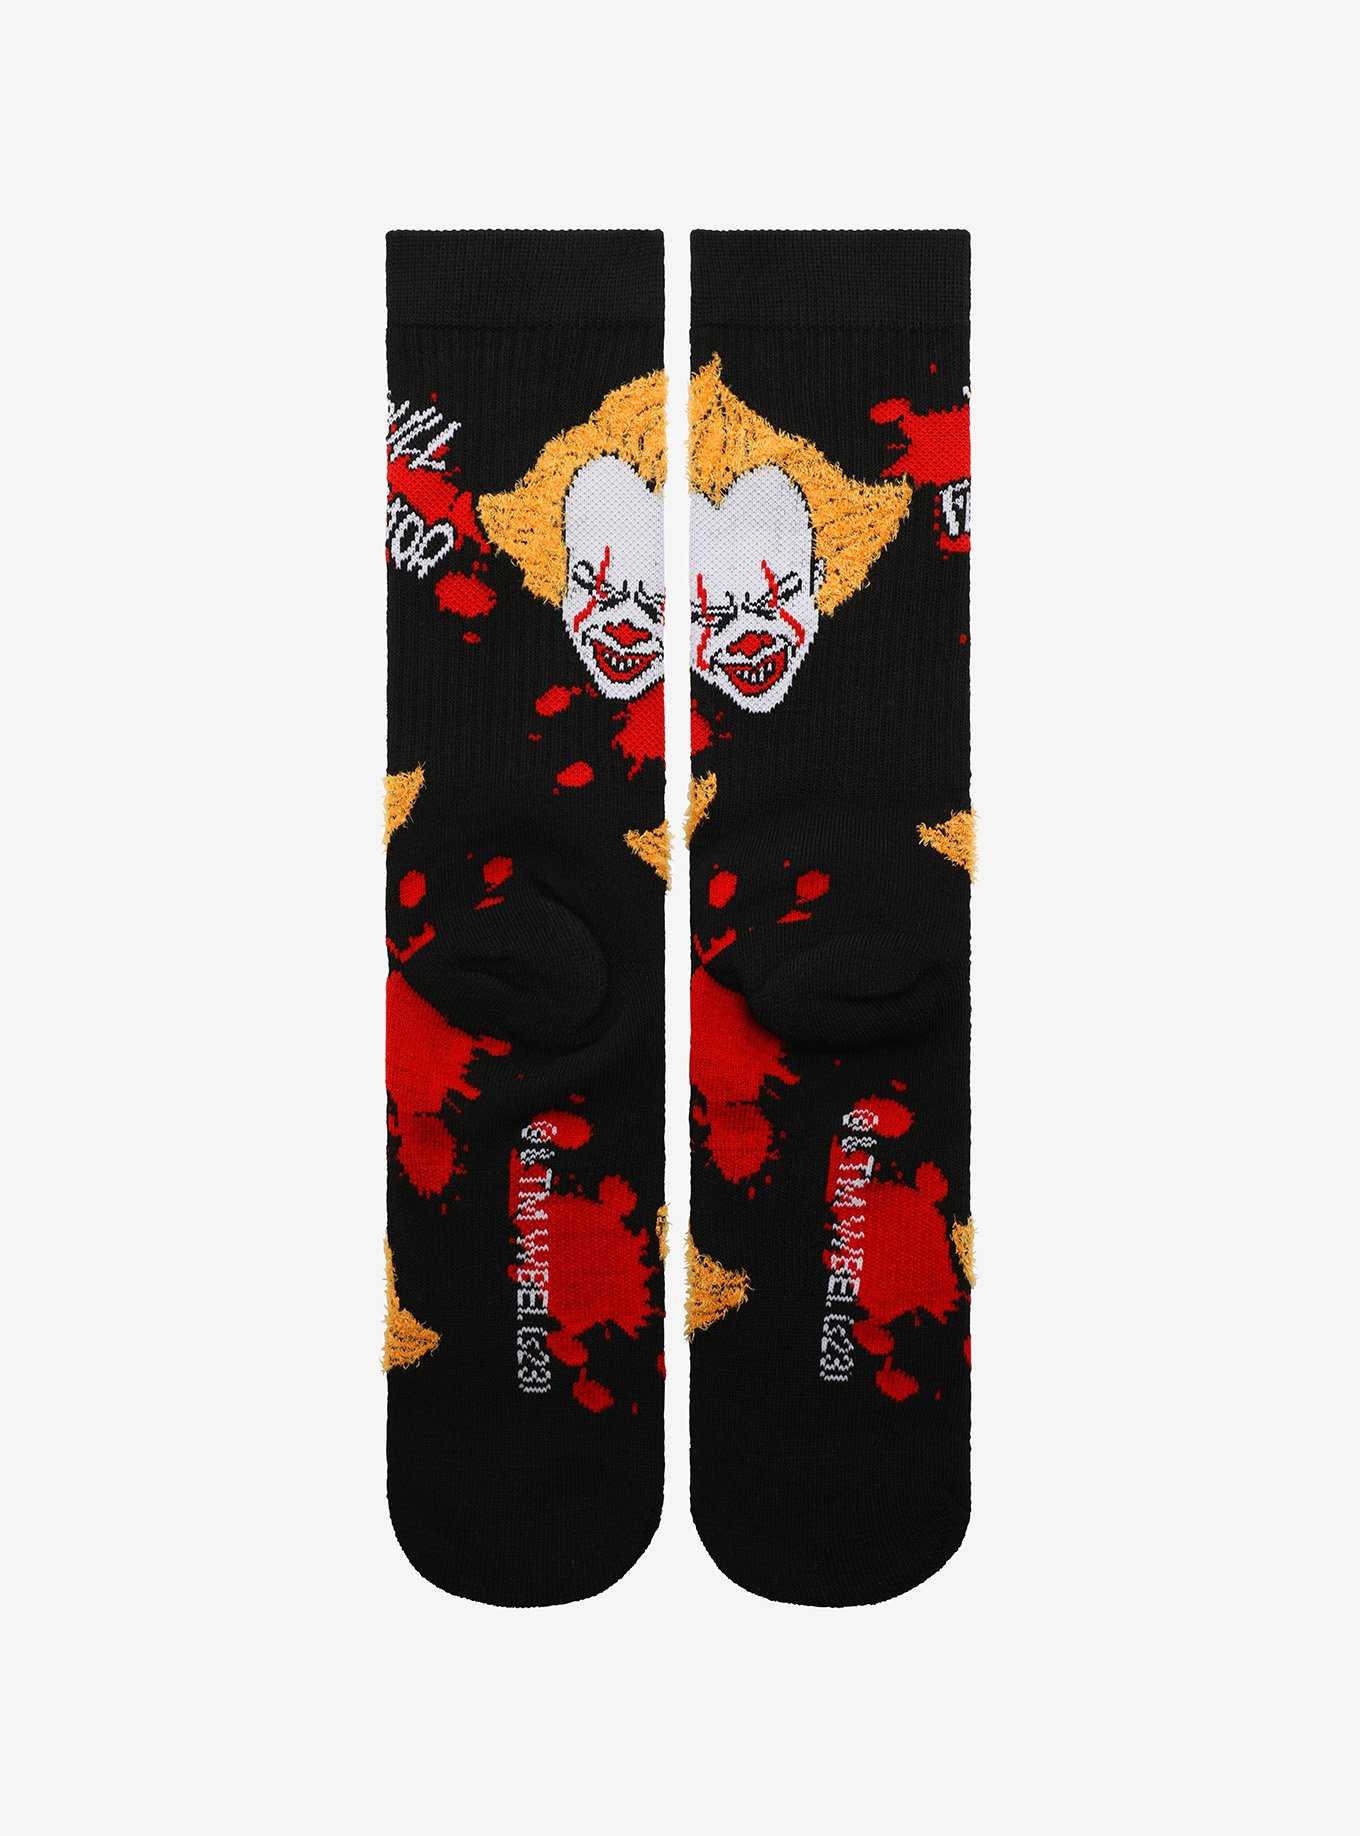 IT Pennywise Chenille Crew Socks, , hi-res